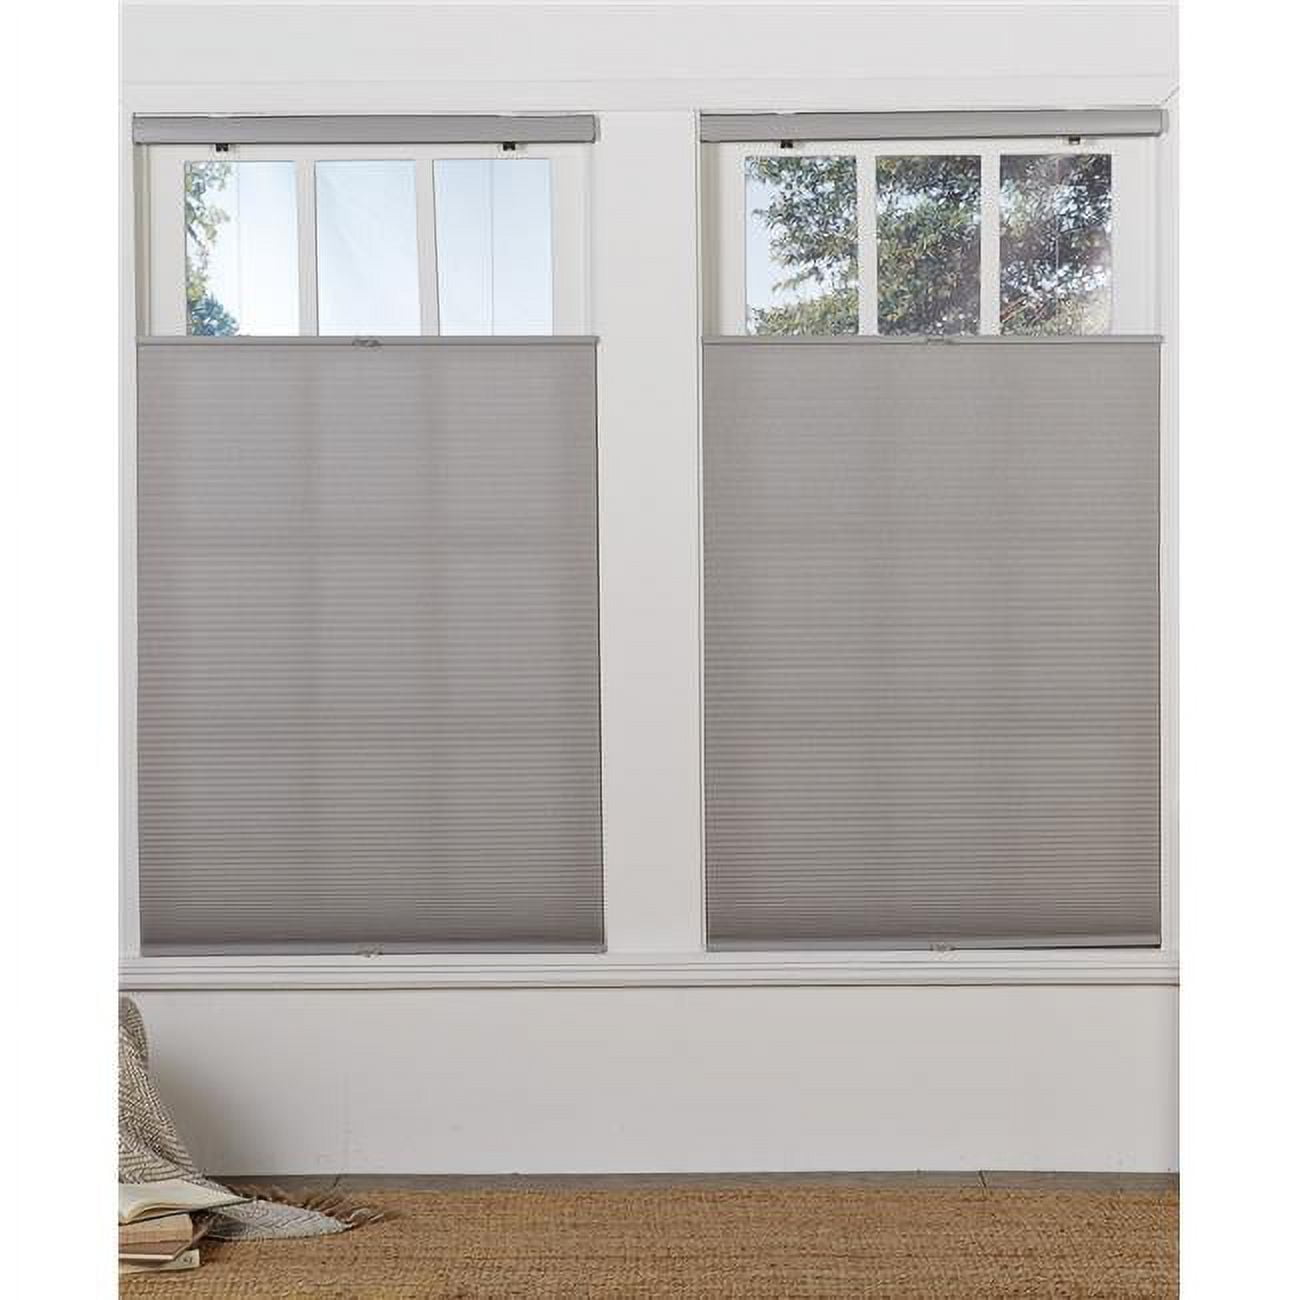 Safe Styles UBG32X72LG Cordless Light Filtering Top Down Bottom Up Shade, Gray Cloud - 32 x 72 in.